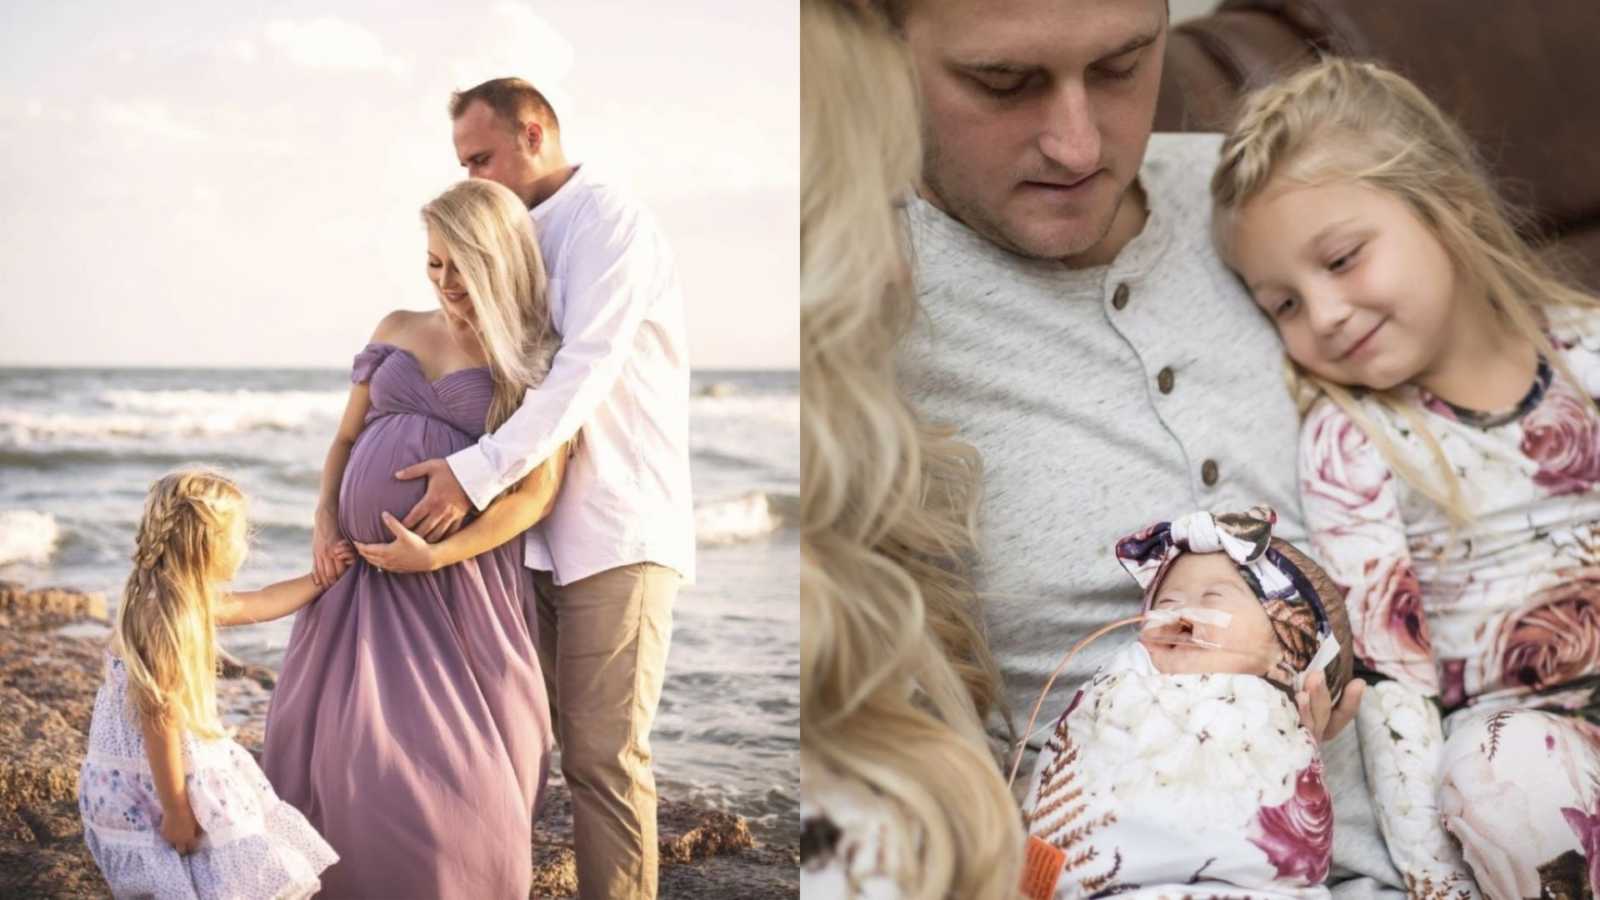 On the left, family of three take pregnancy photos on the beach, on the right, family of three hold newborn with Alobar Holoprosencephaly